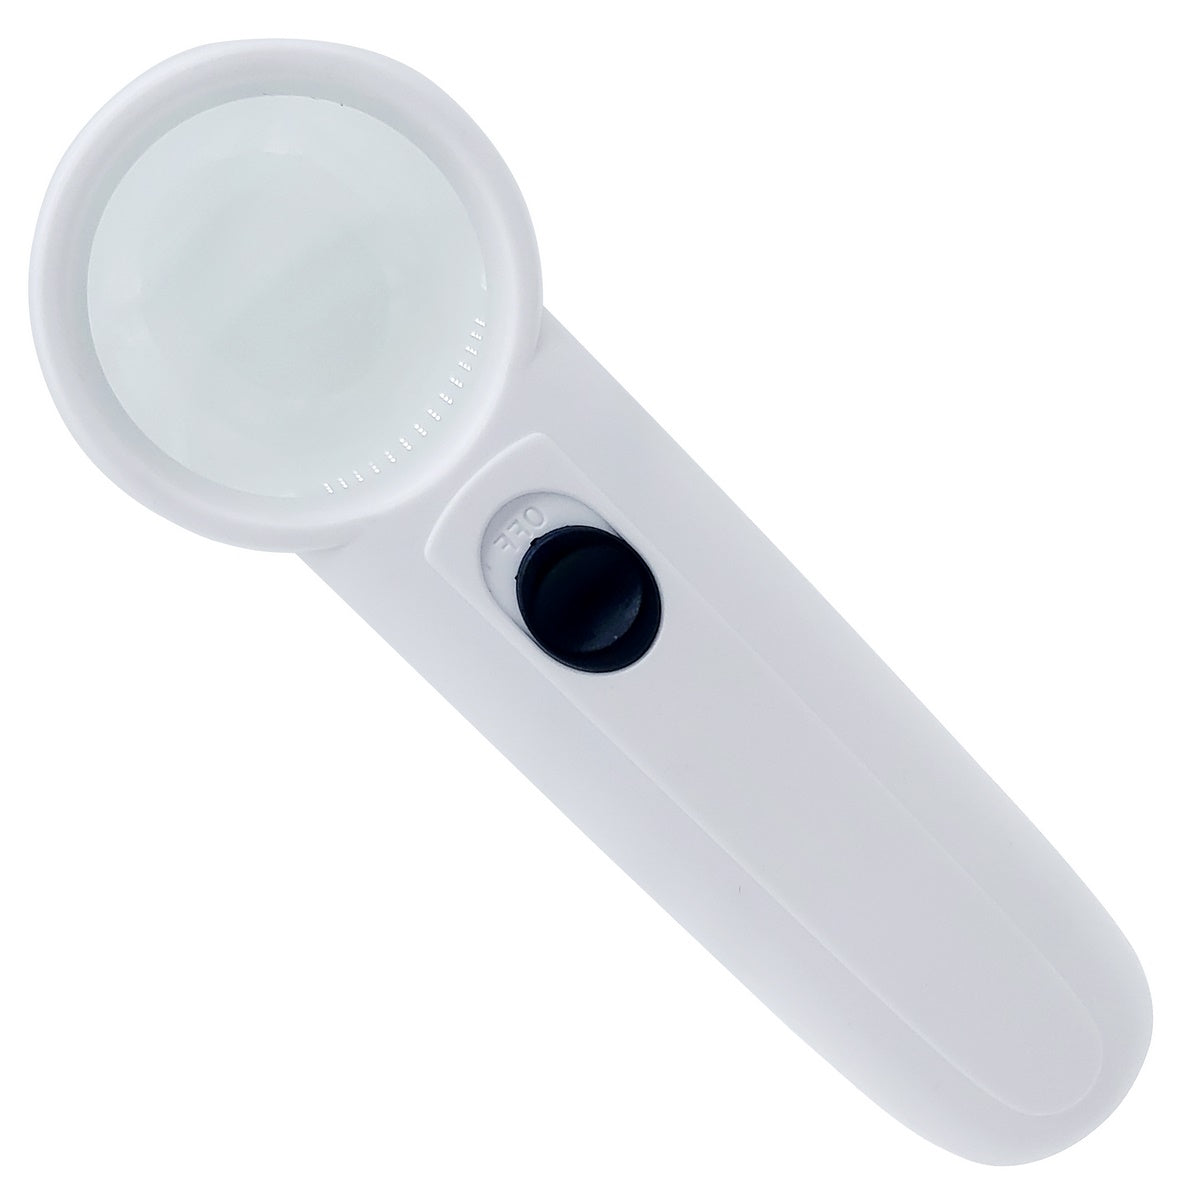 jags-mumbai Office Desk Stationery Hand Hold Magnifier Glass 15X 37MM